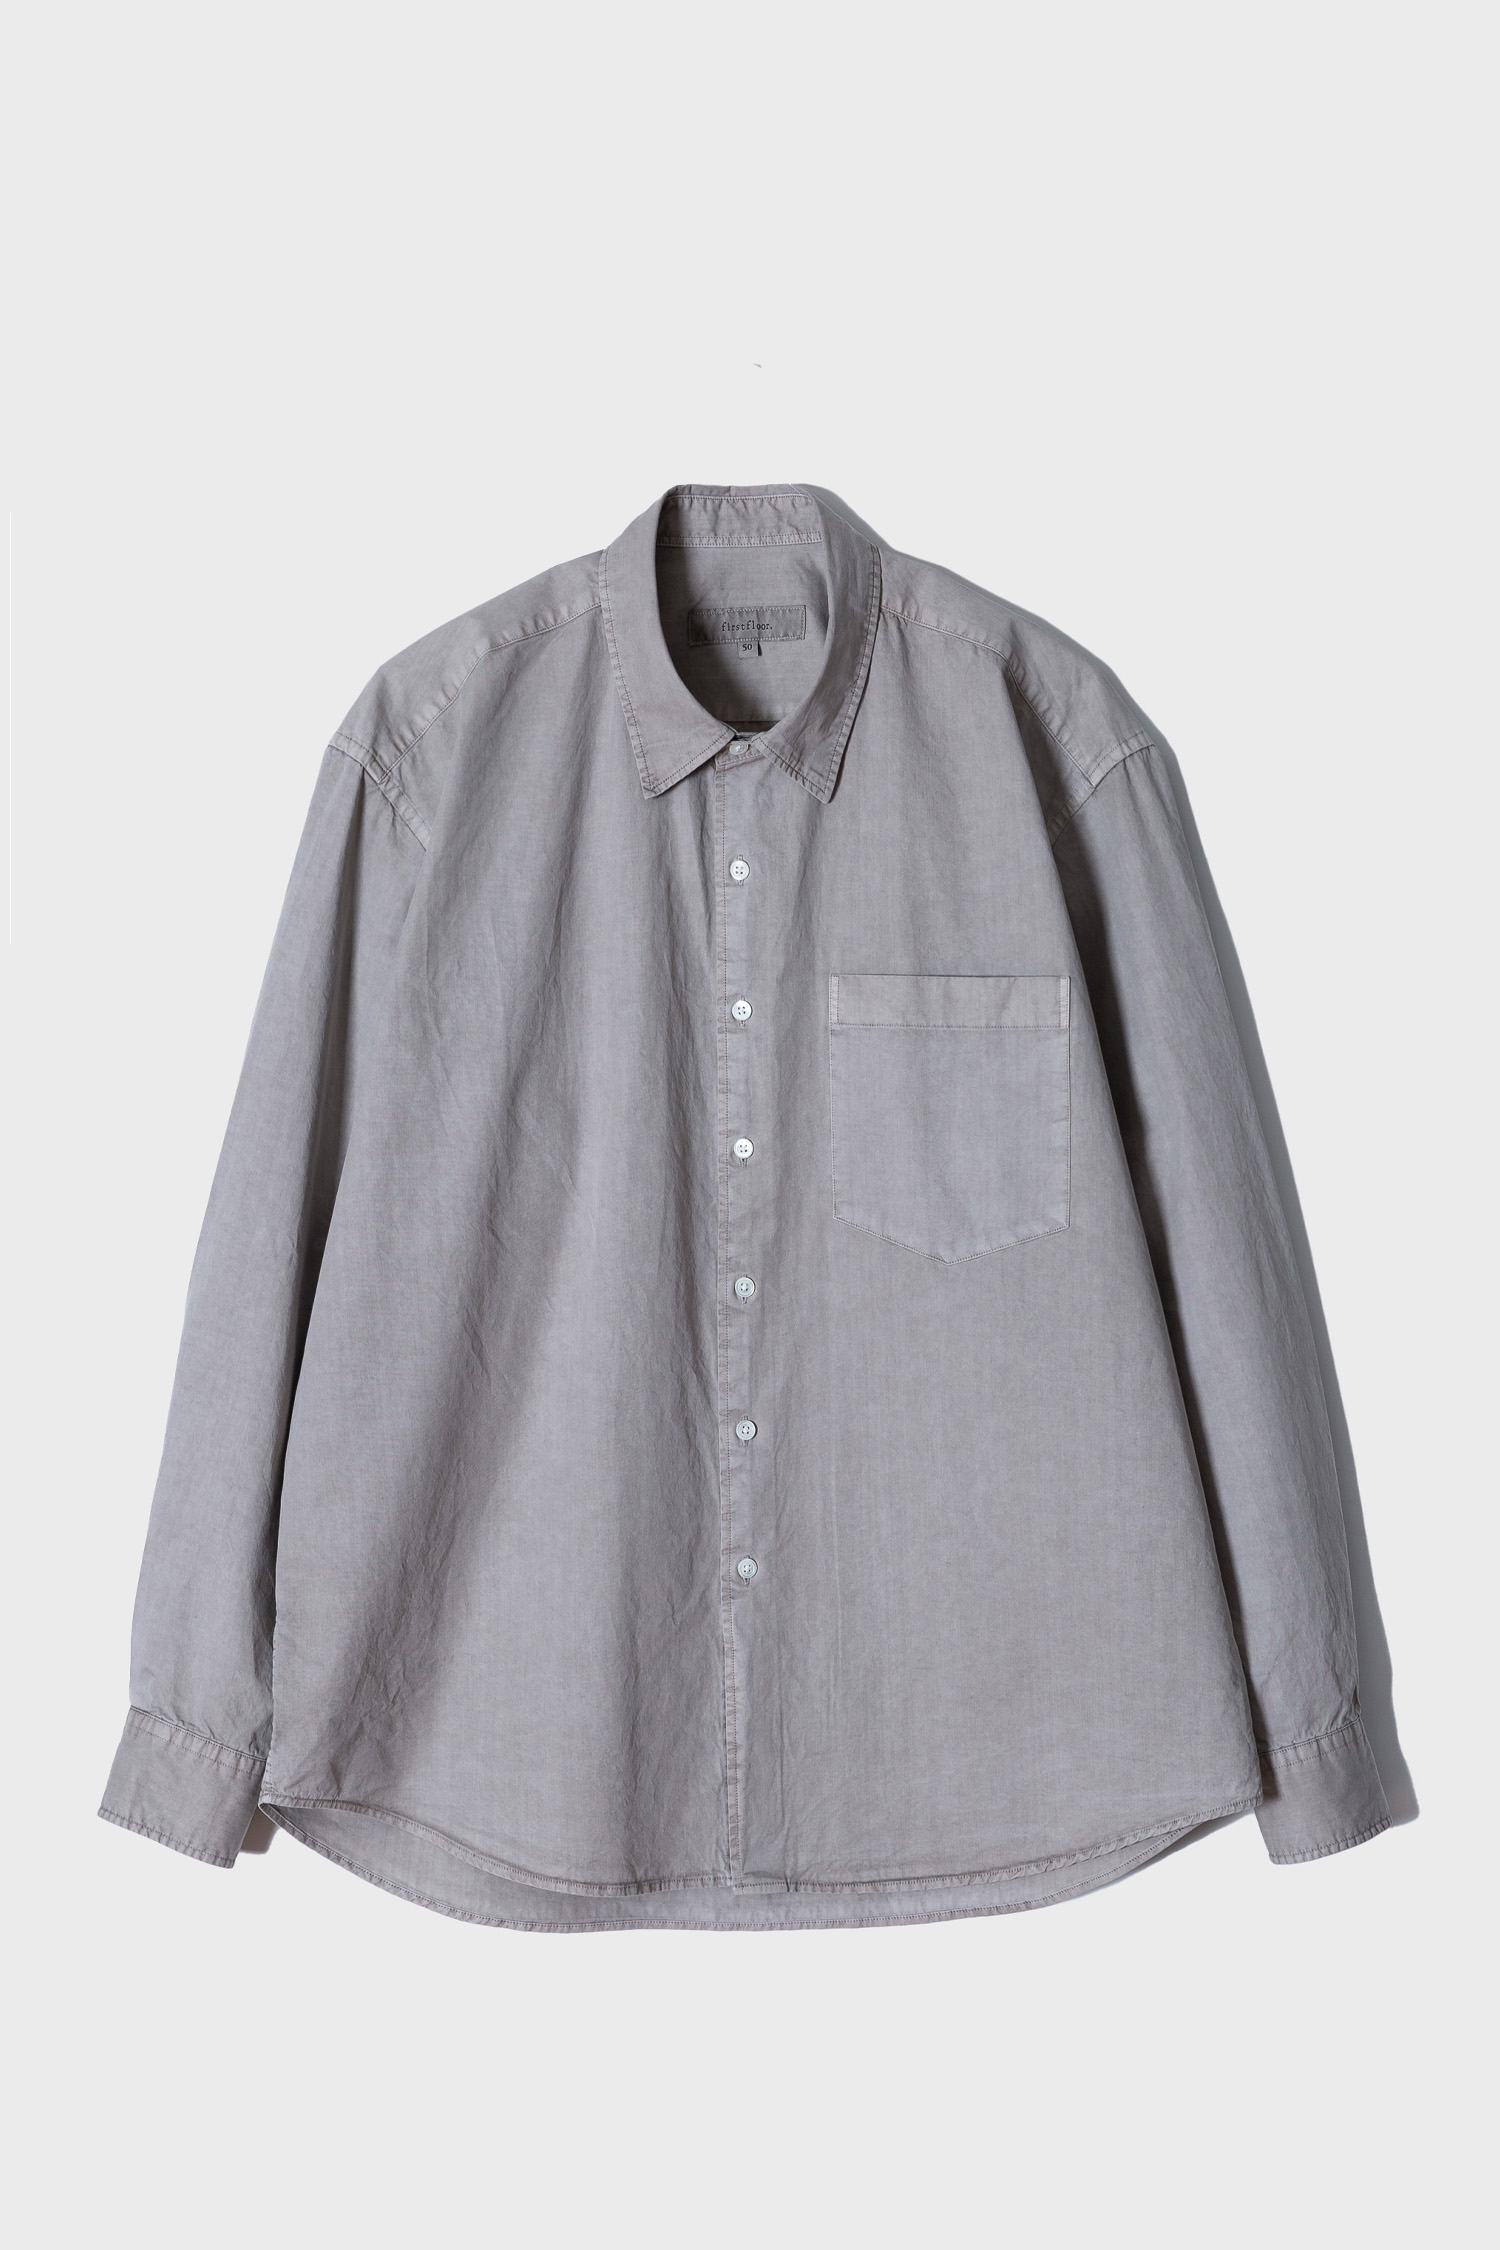 Garment dyed box shirt (japanese processed, 5 colors)